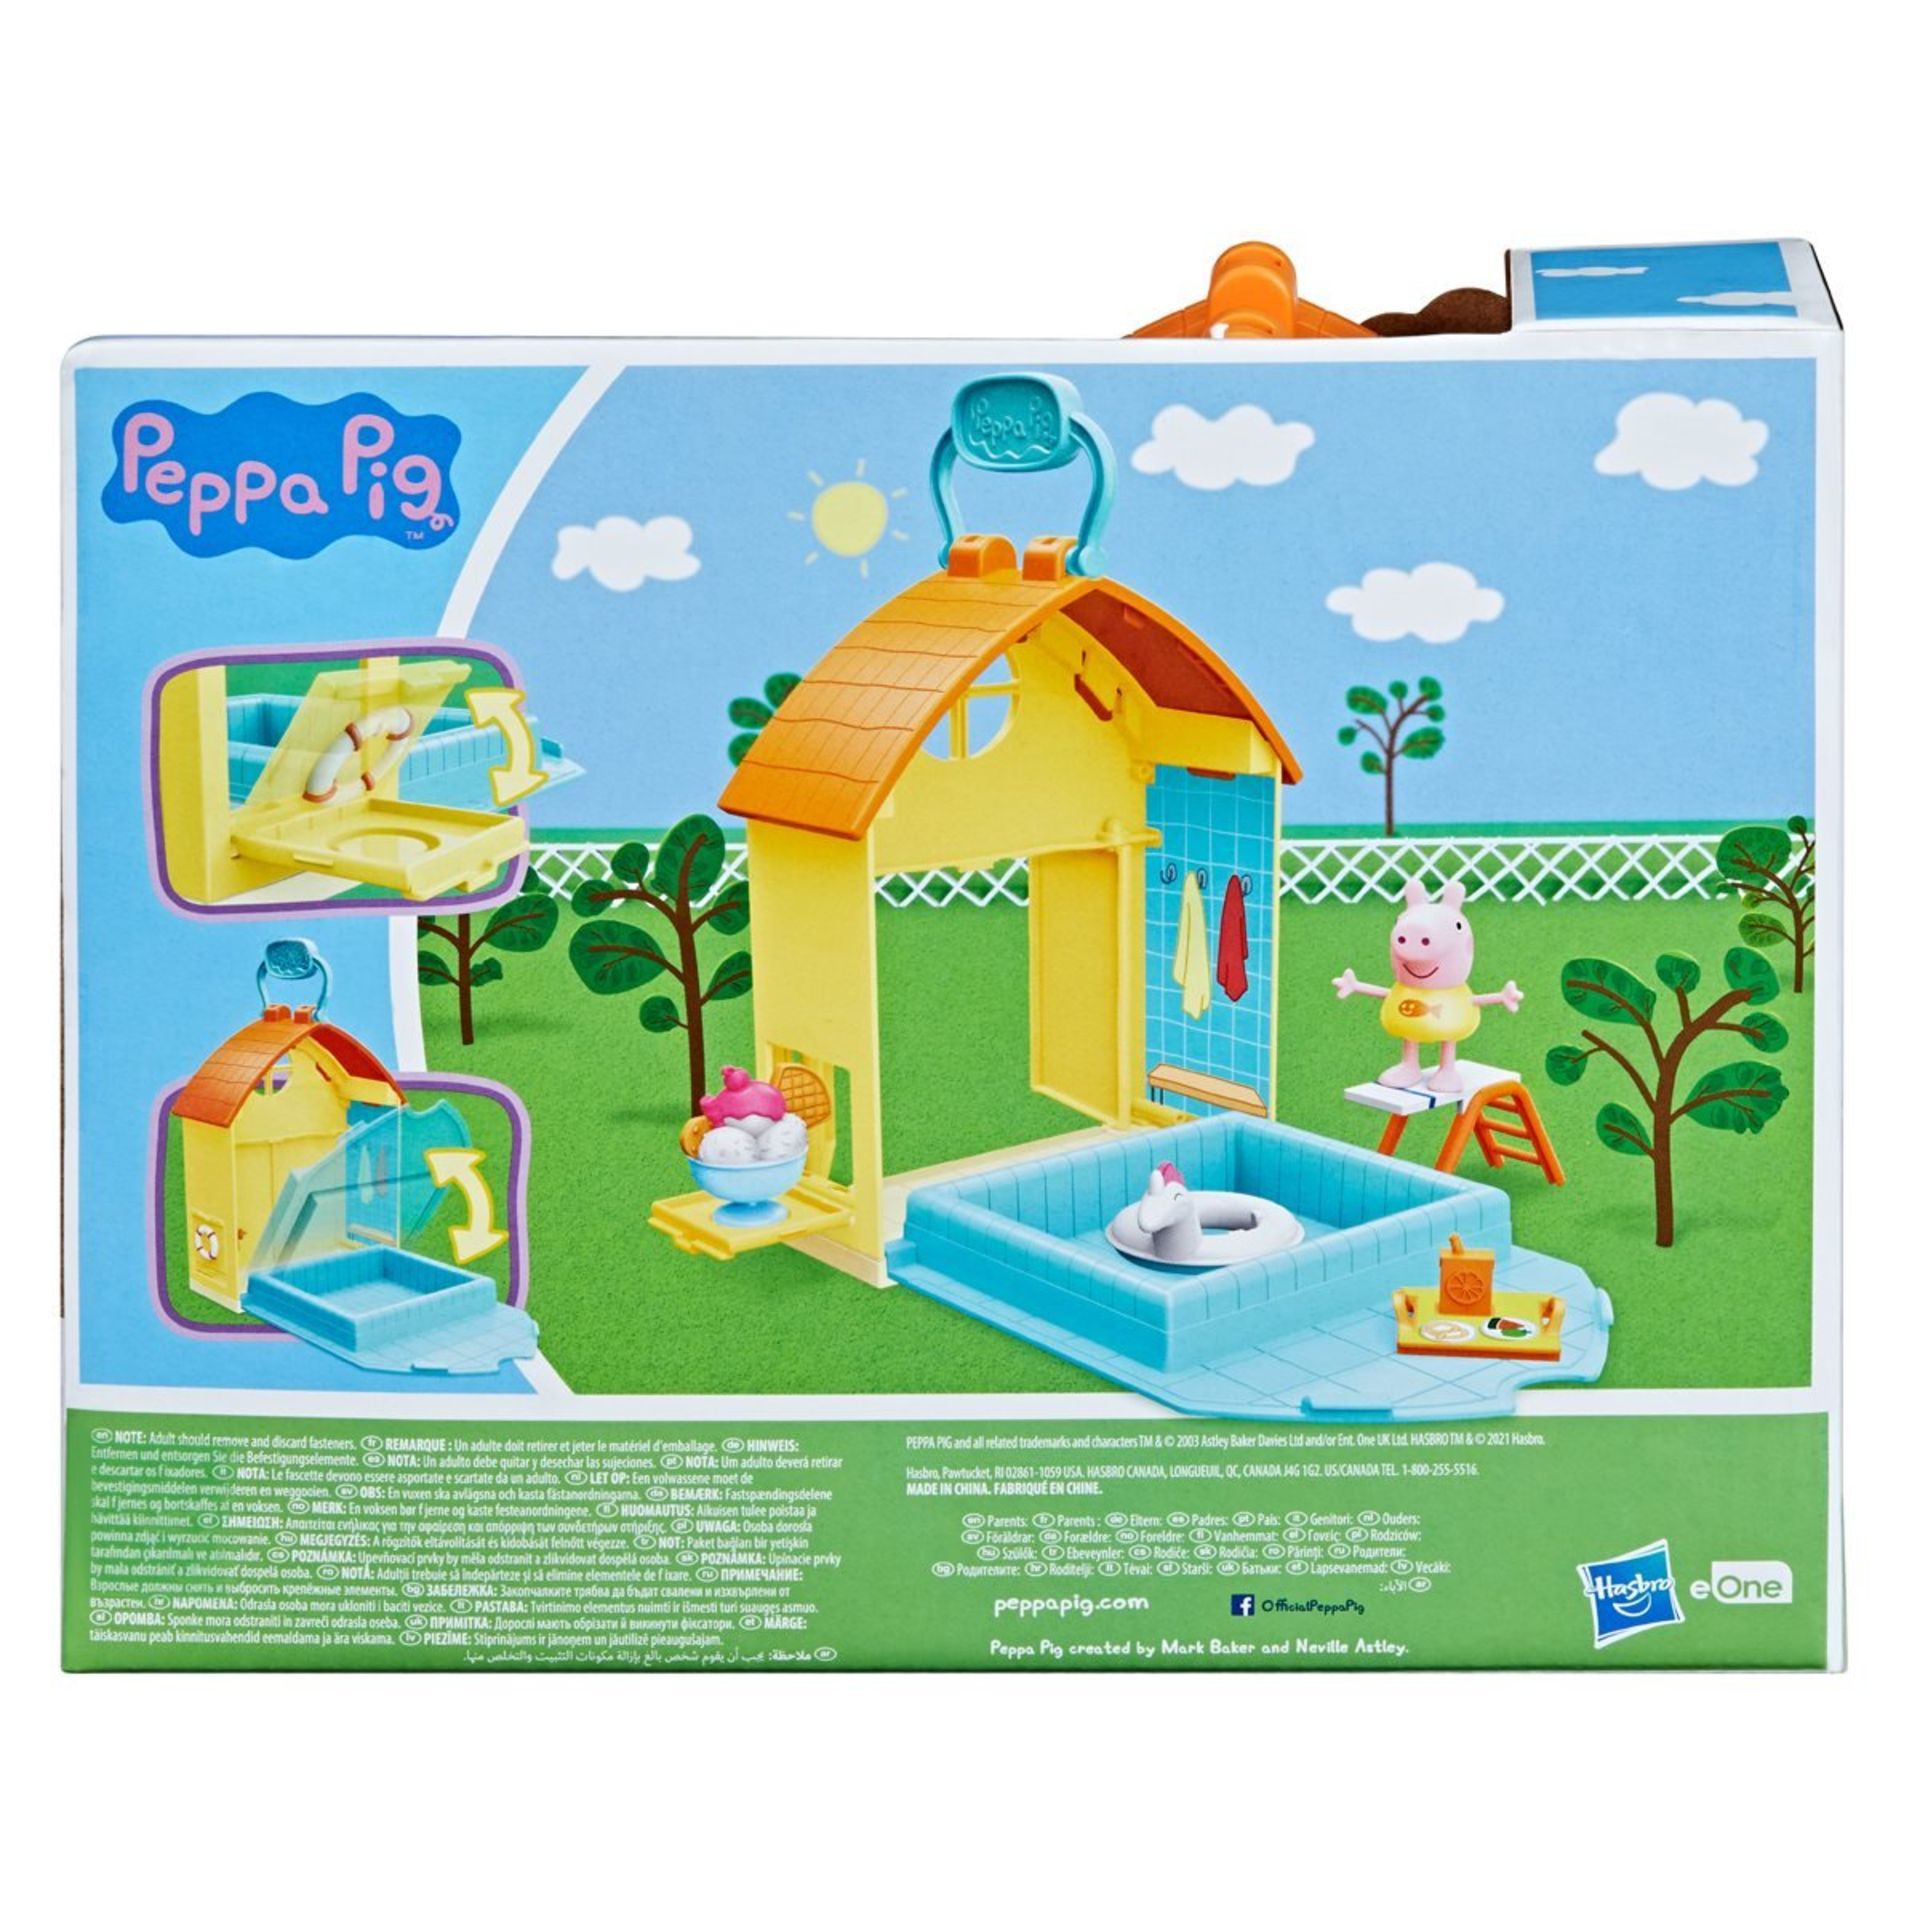 100 X NEW PEPPAS SWIMMING POOL FUN - MAIL ORDER PACKAGING - Image 8 of 11